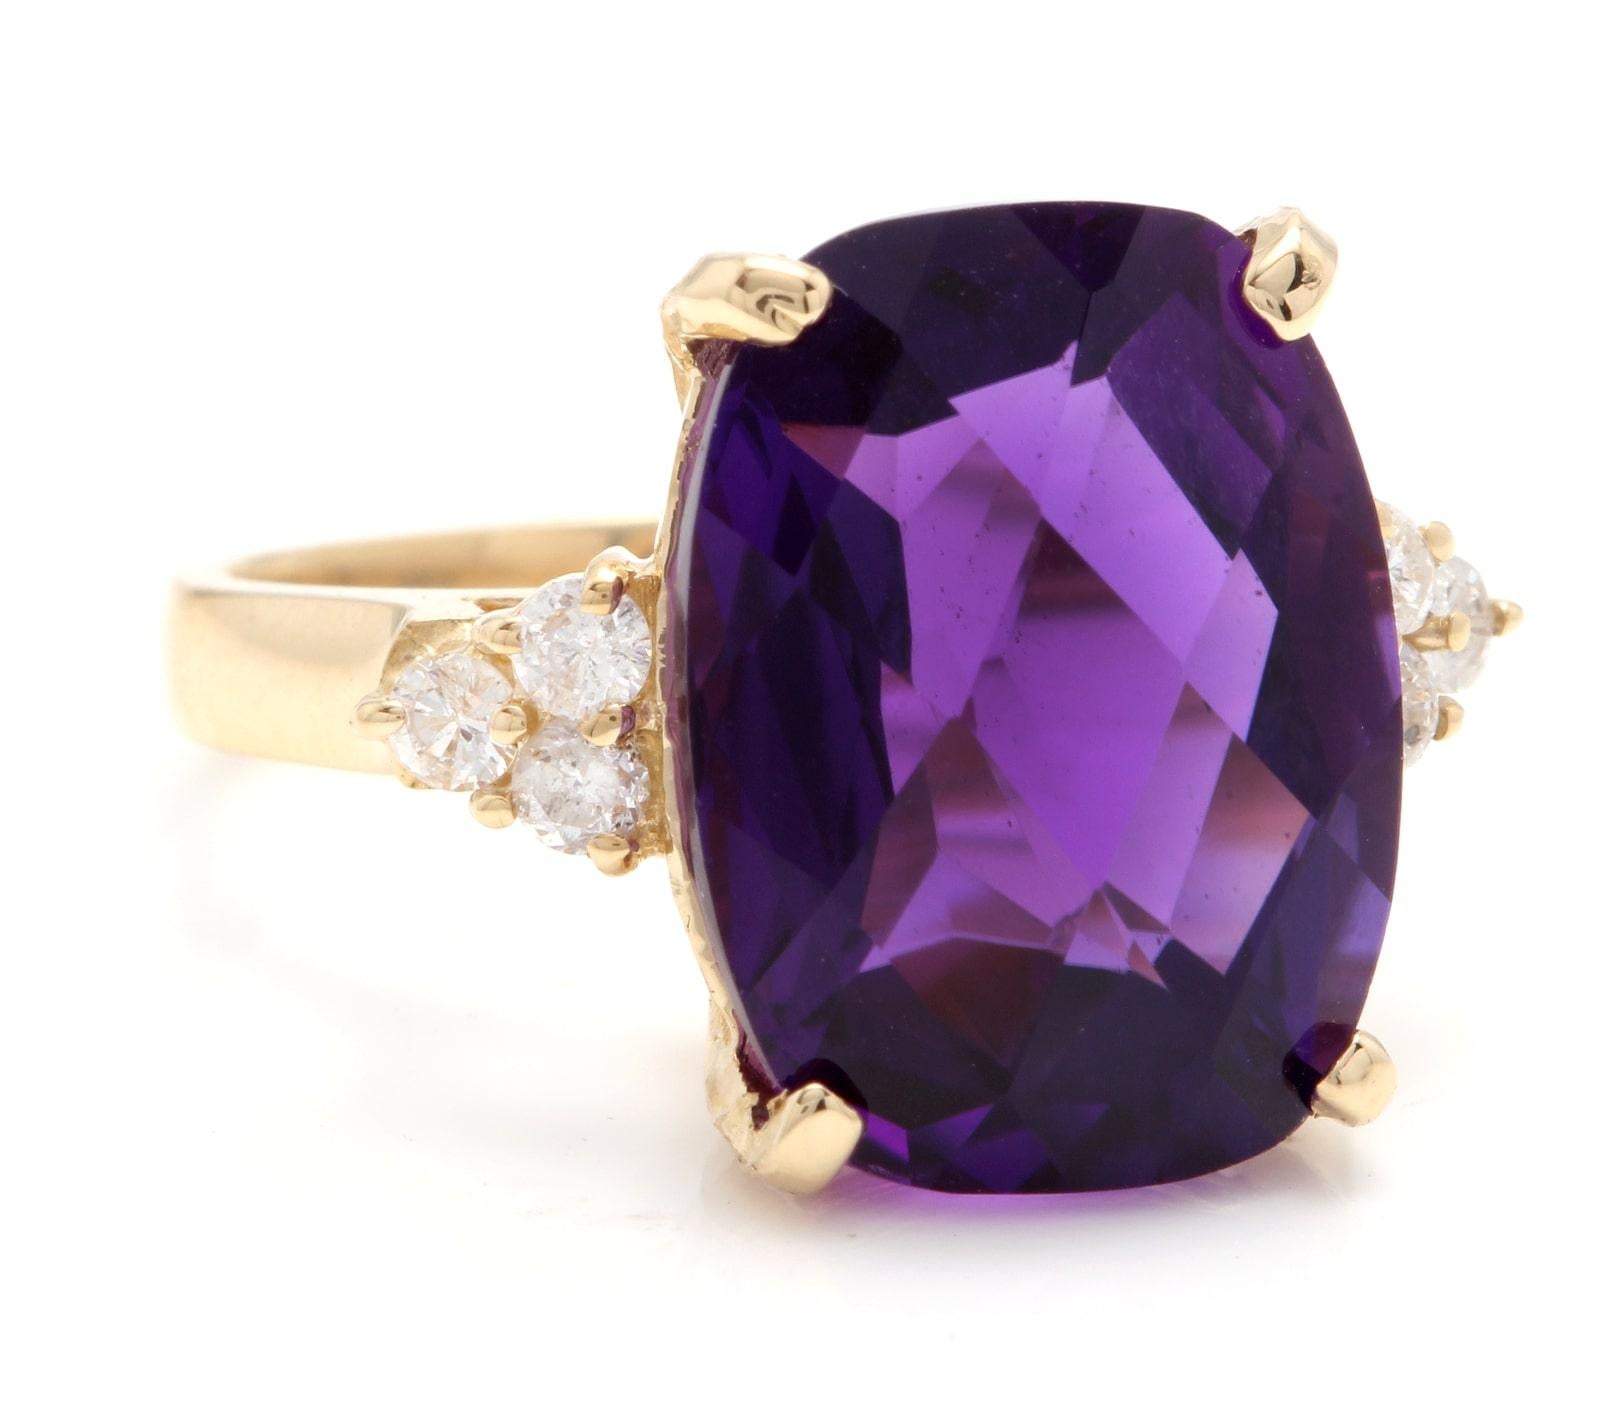 9.35 Carats Natural Impressive Amethyst and Diamond 14K Yellow Gold Ring

Total Amethyst Weight: Approx. 9.00 Carats

Amethyst Measures: Approx. 16 x 12mm

Natural Round Diamonds Weight: 0.35 Carats (color G-H / Clarity SI1-SI2)

Ring size: 7 (we